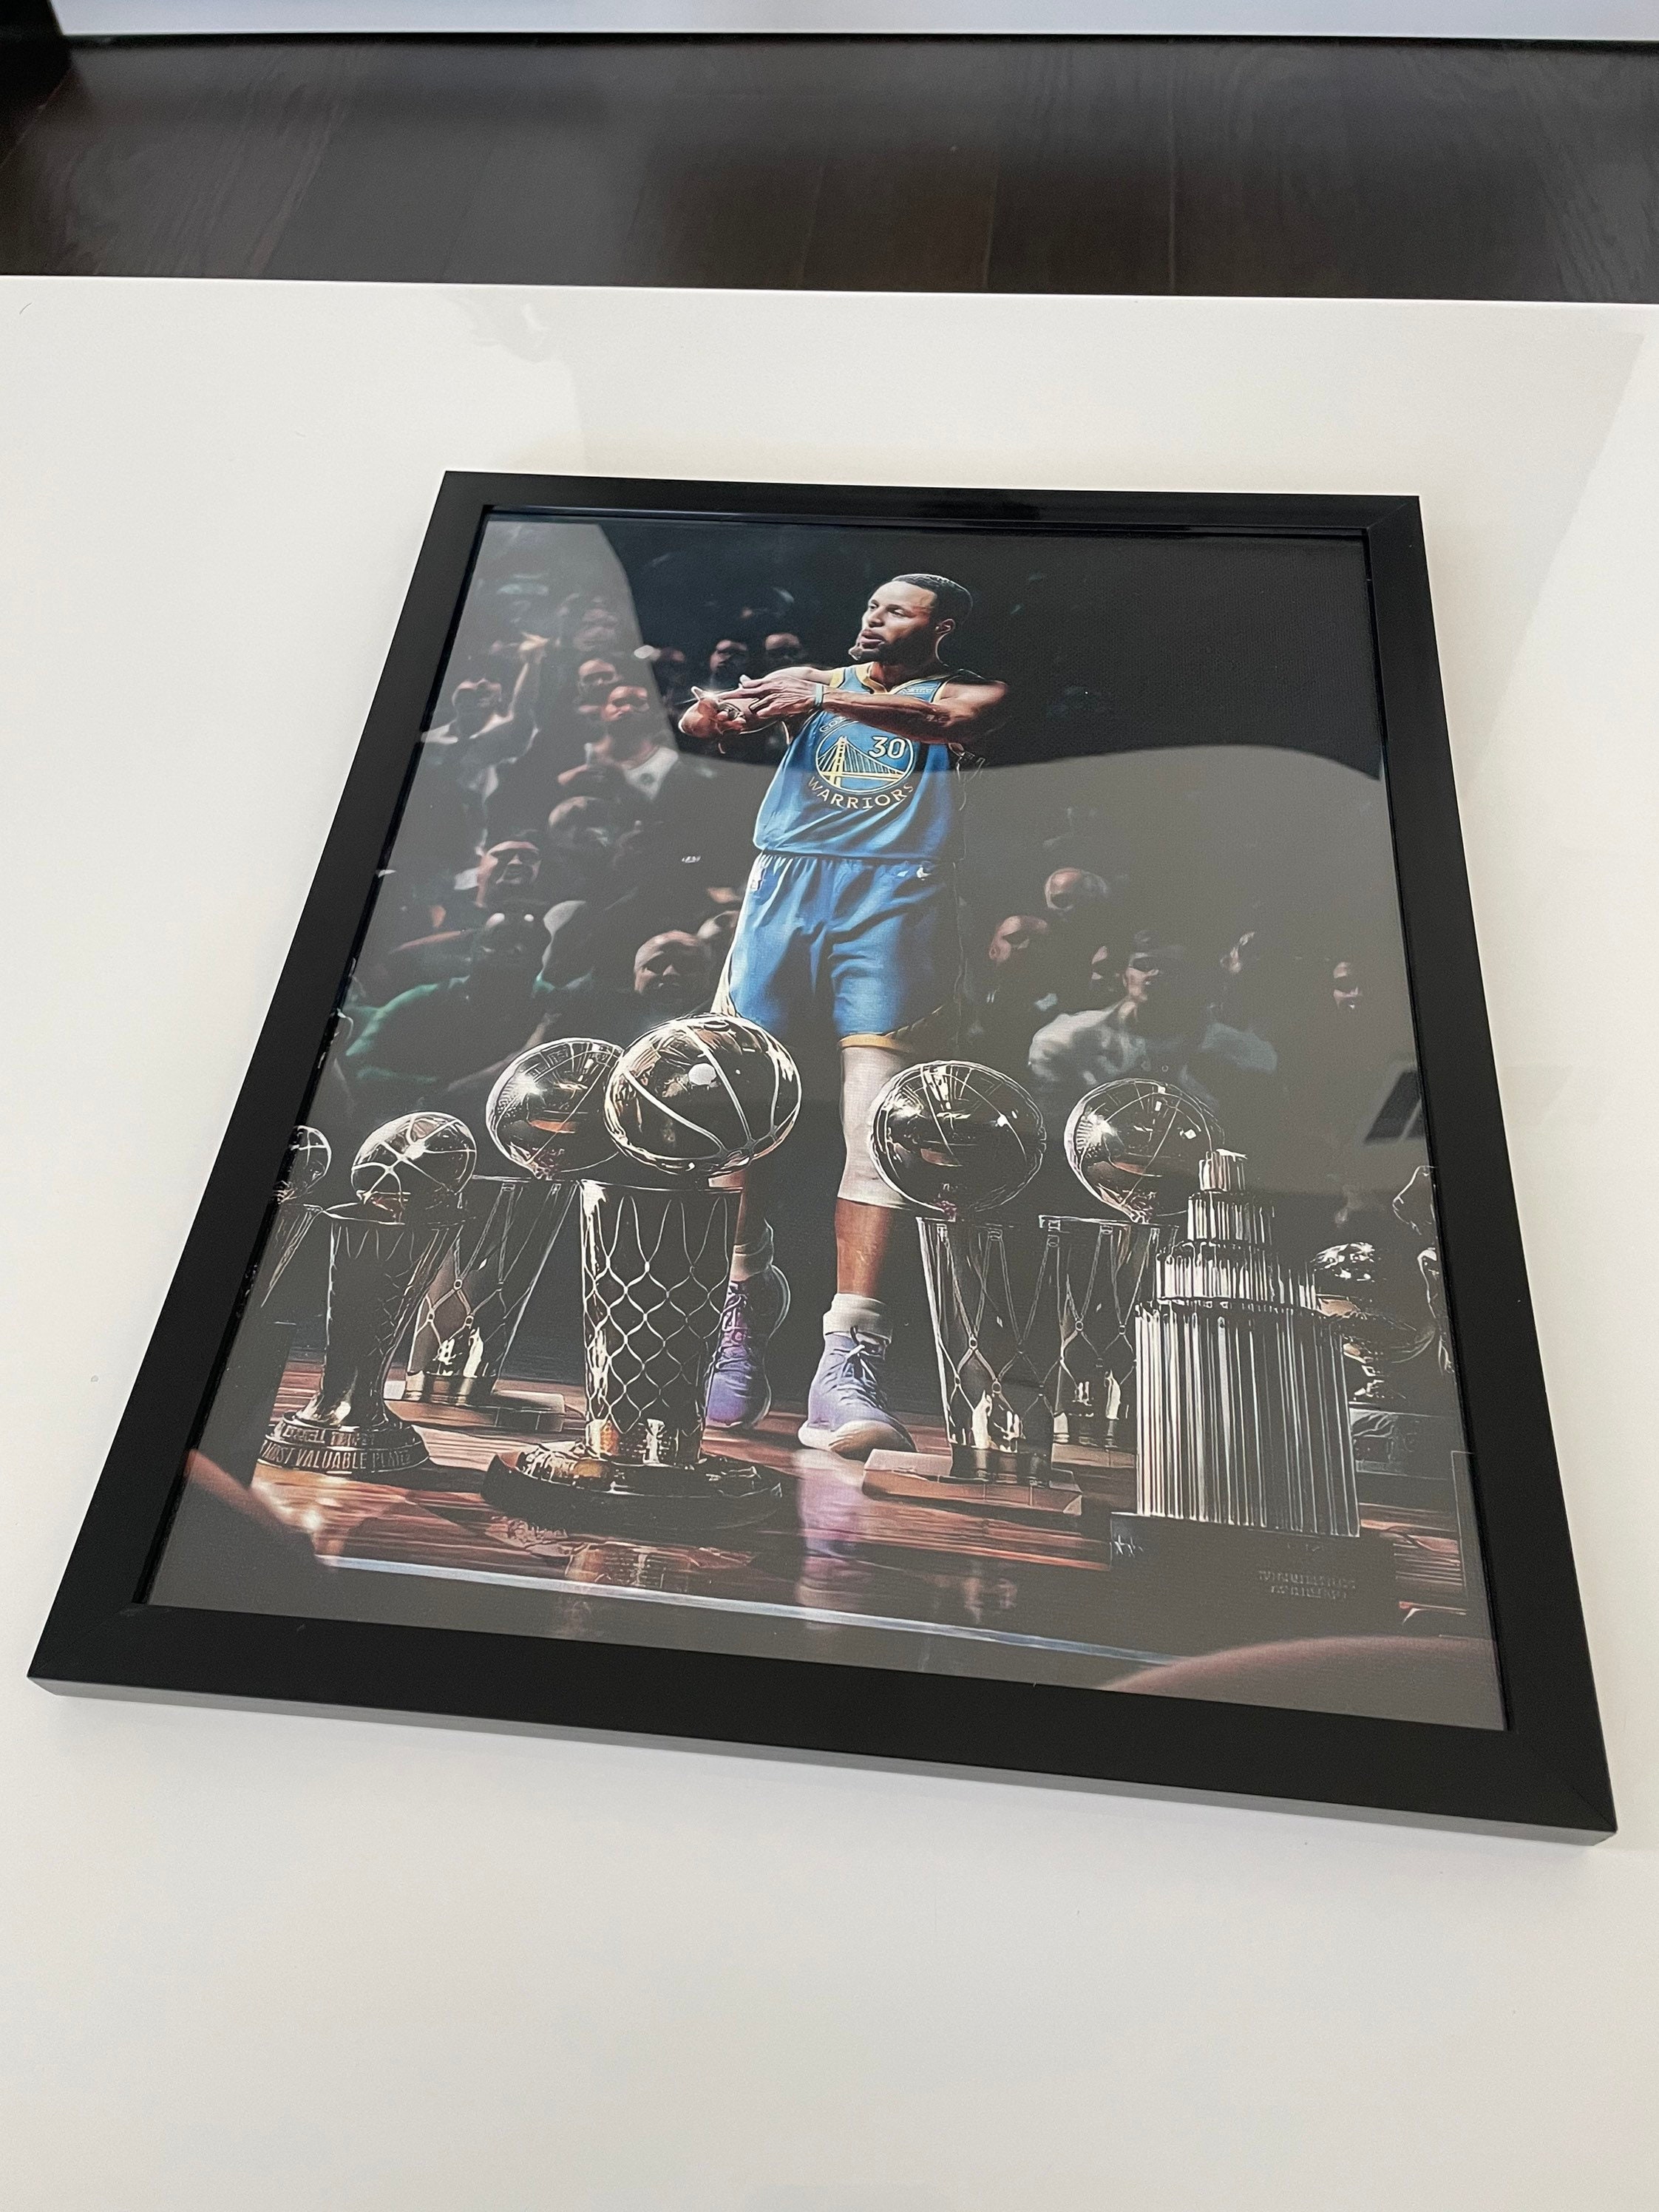 Jordan Poole Signed Poster Wall Art Picture Home Living Room Bedroom Office Sports Club The Boys Painting Gift. Unframe-style-1, 12x18inch(30x45cm)